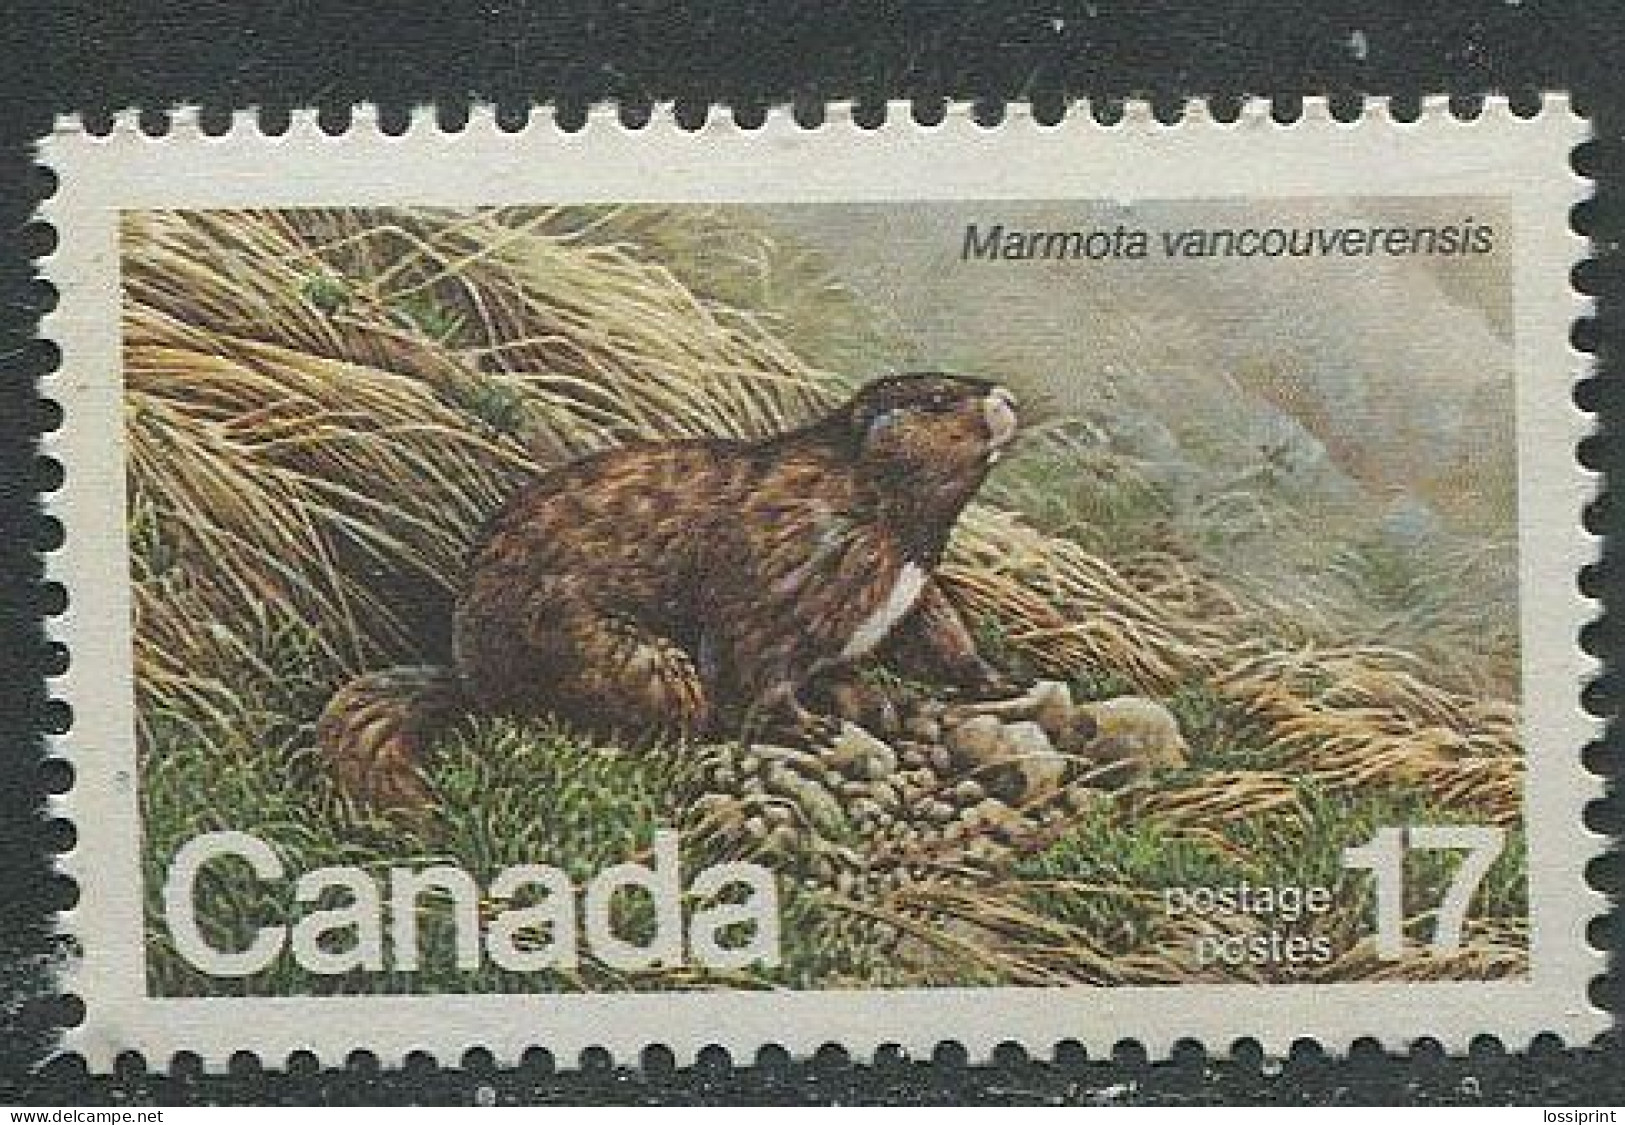 Canada:Unused Stamp Vancouver Island Marmot, 1981, MNH - Rodents